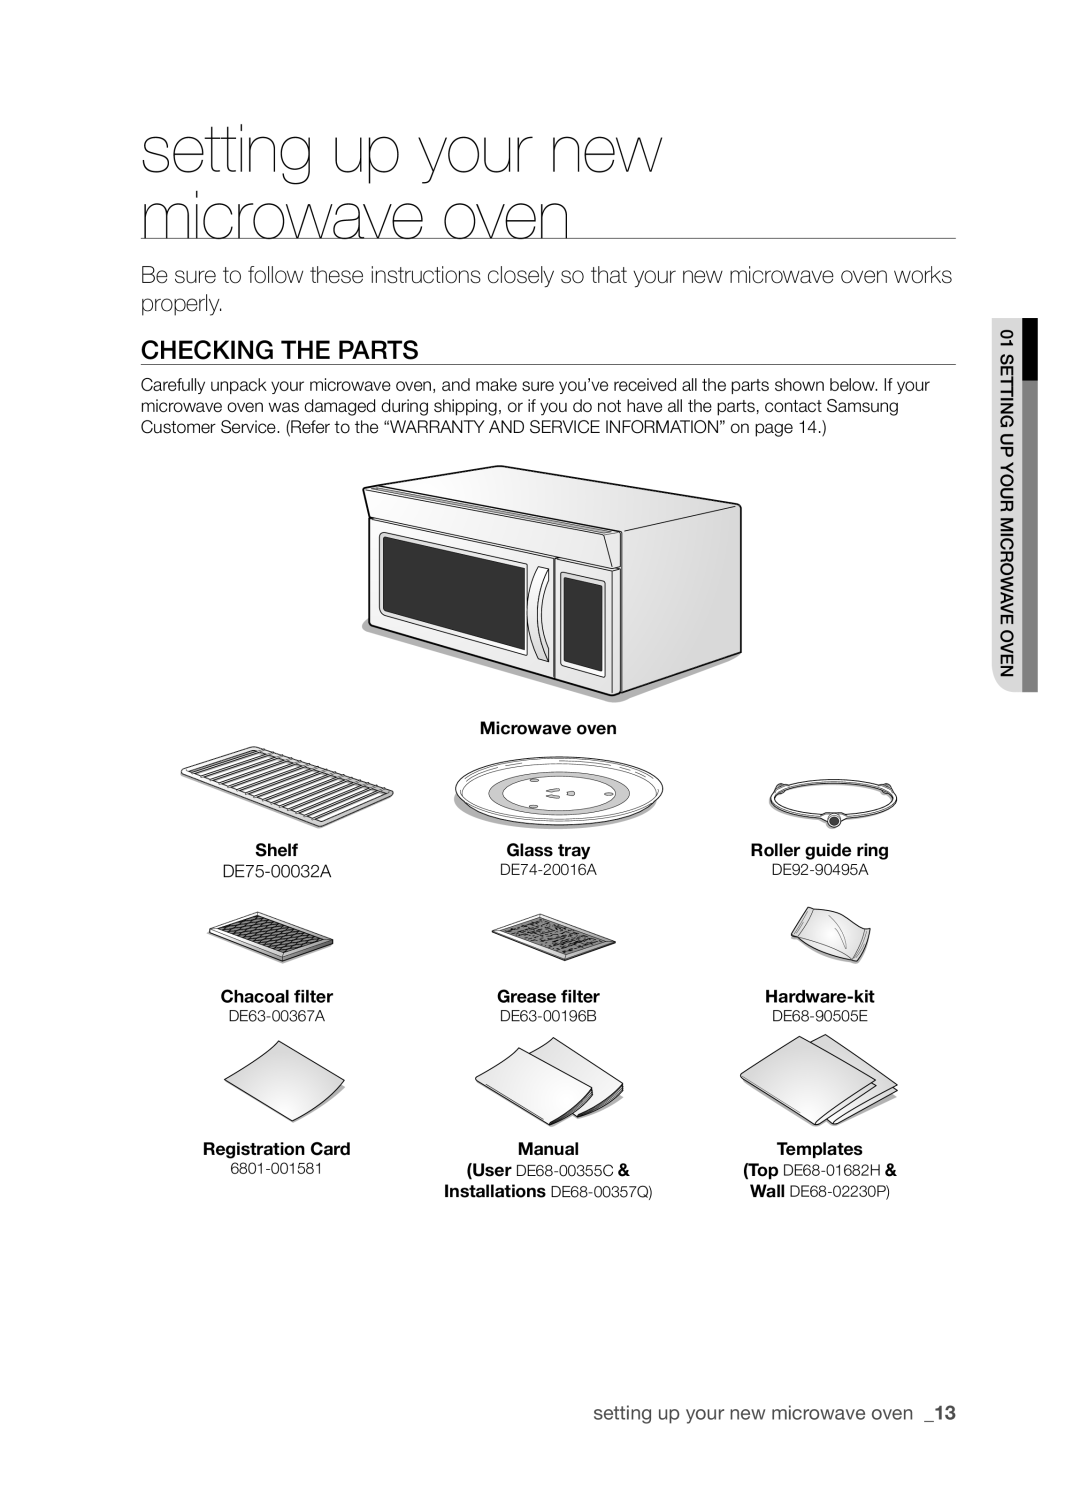 Samsung SMH8165STE setting up your new microwave oven, Checking the parts, Microwave oven, Shelf, Glass tray, Hardware-kit 